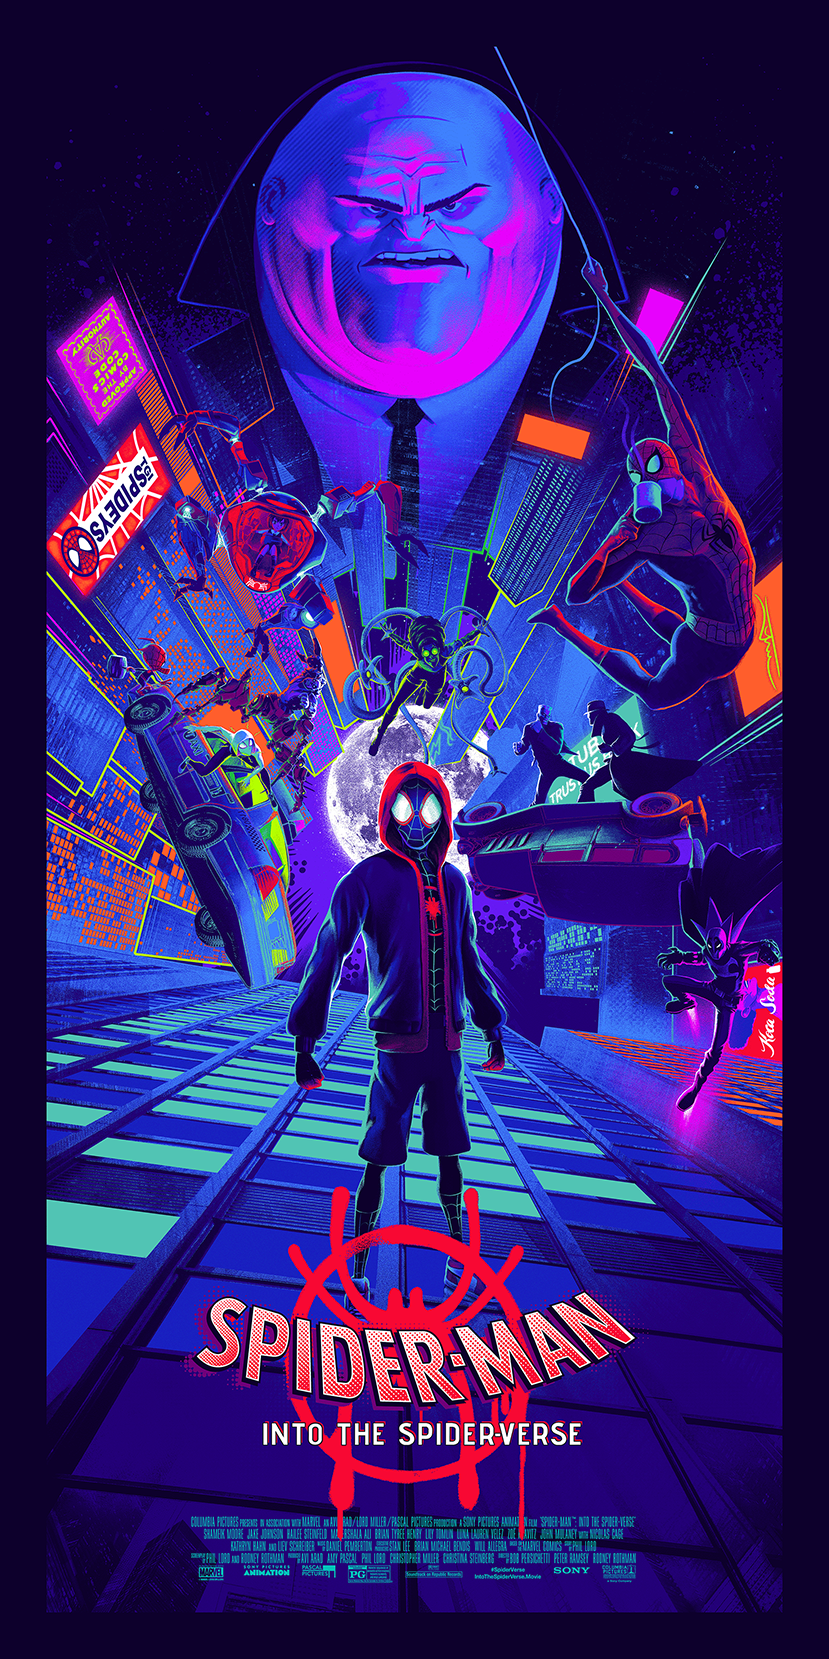 INSIDE THE ROCK POSTER FRAME BLOG: Juan Ramos Spider-Man Into the Spider- Verse Movie Poster Release